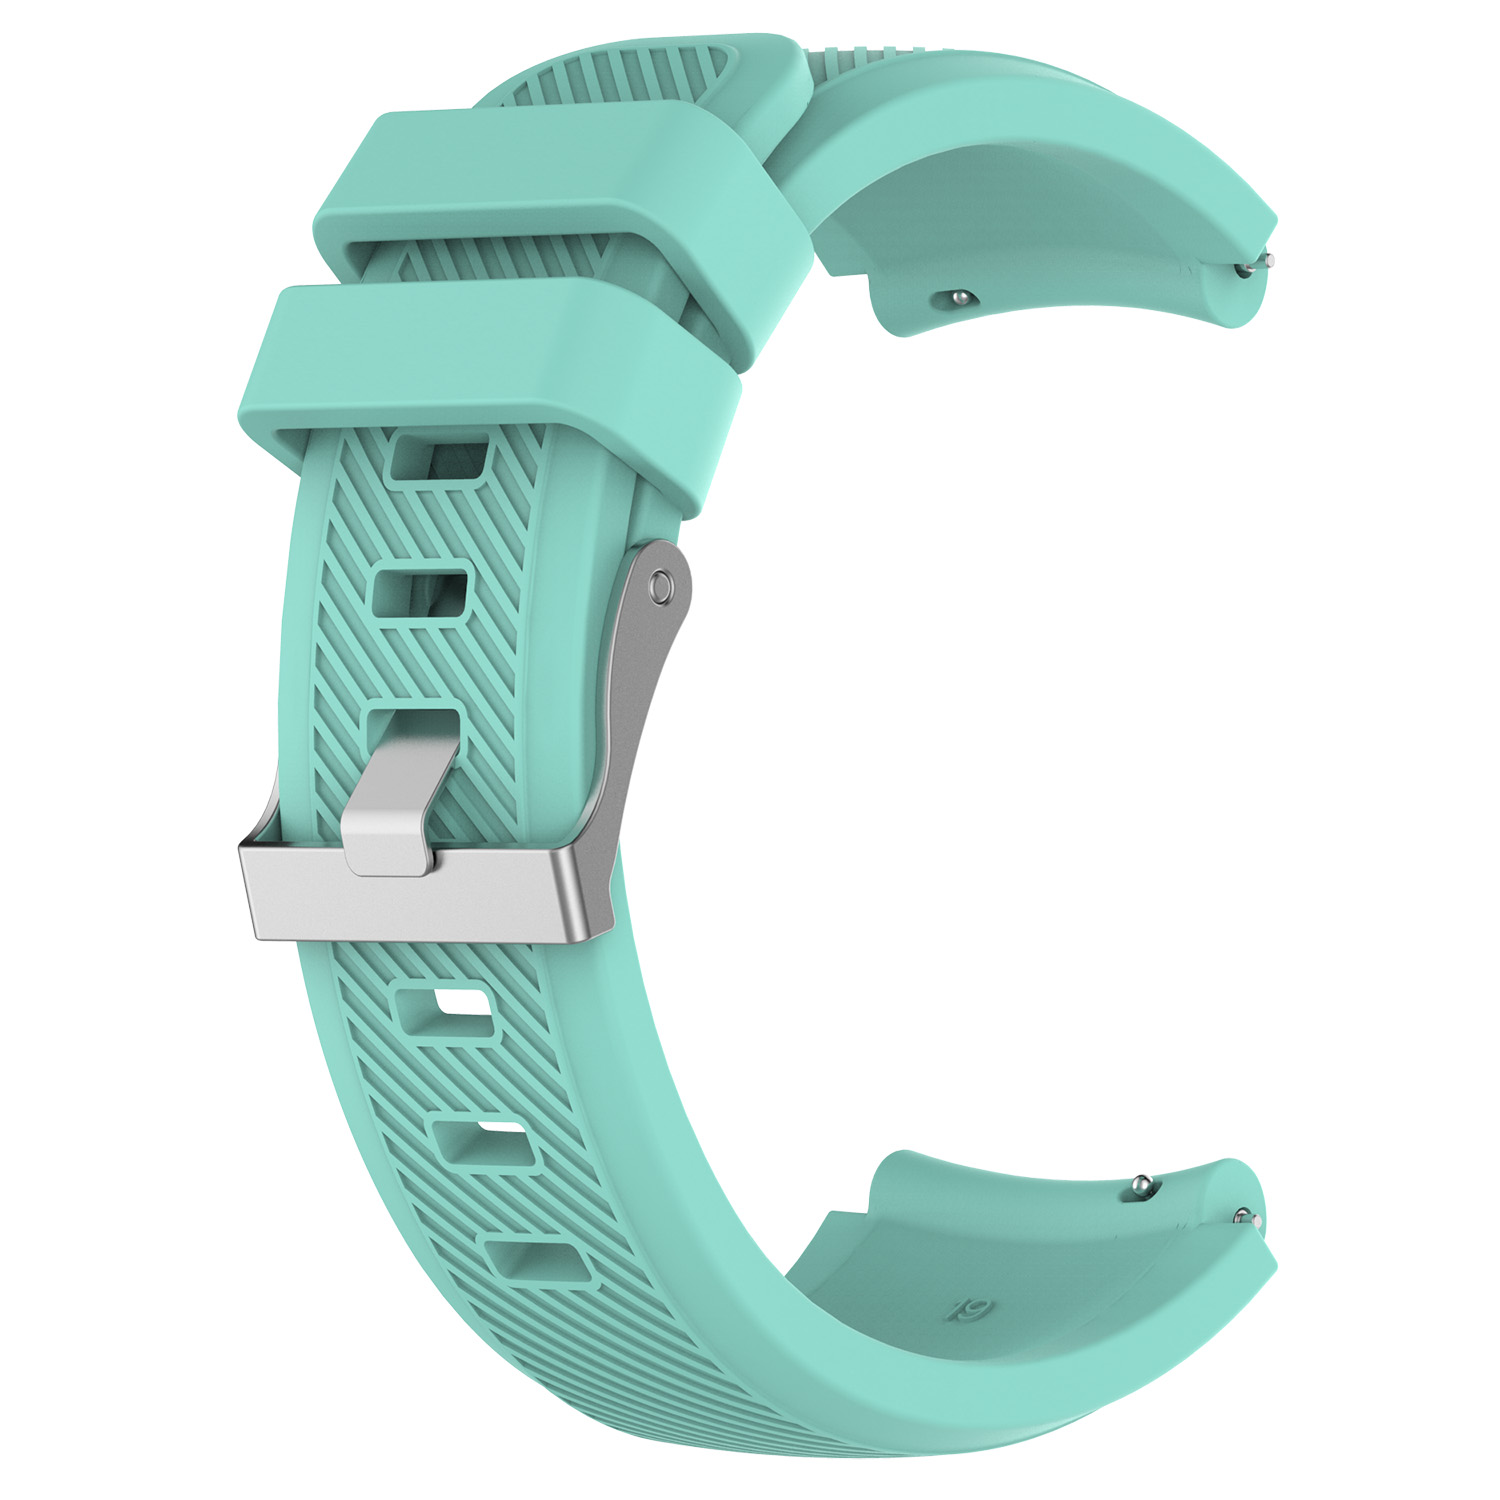 Bakeey-22mm-Universal-Watch-Band-Silicone-Watch-Strap-Replacement-for-HUAWEI-Watch-GT-1730954-11